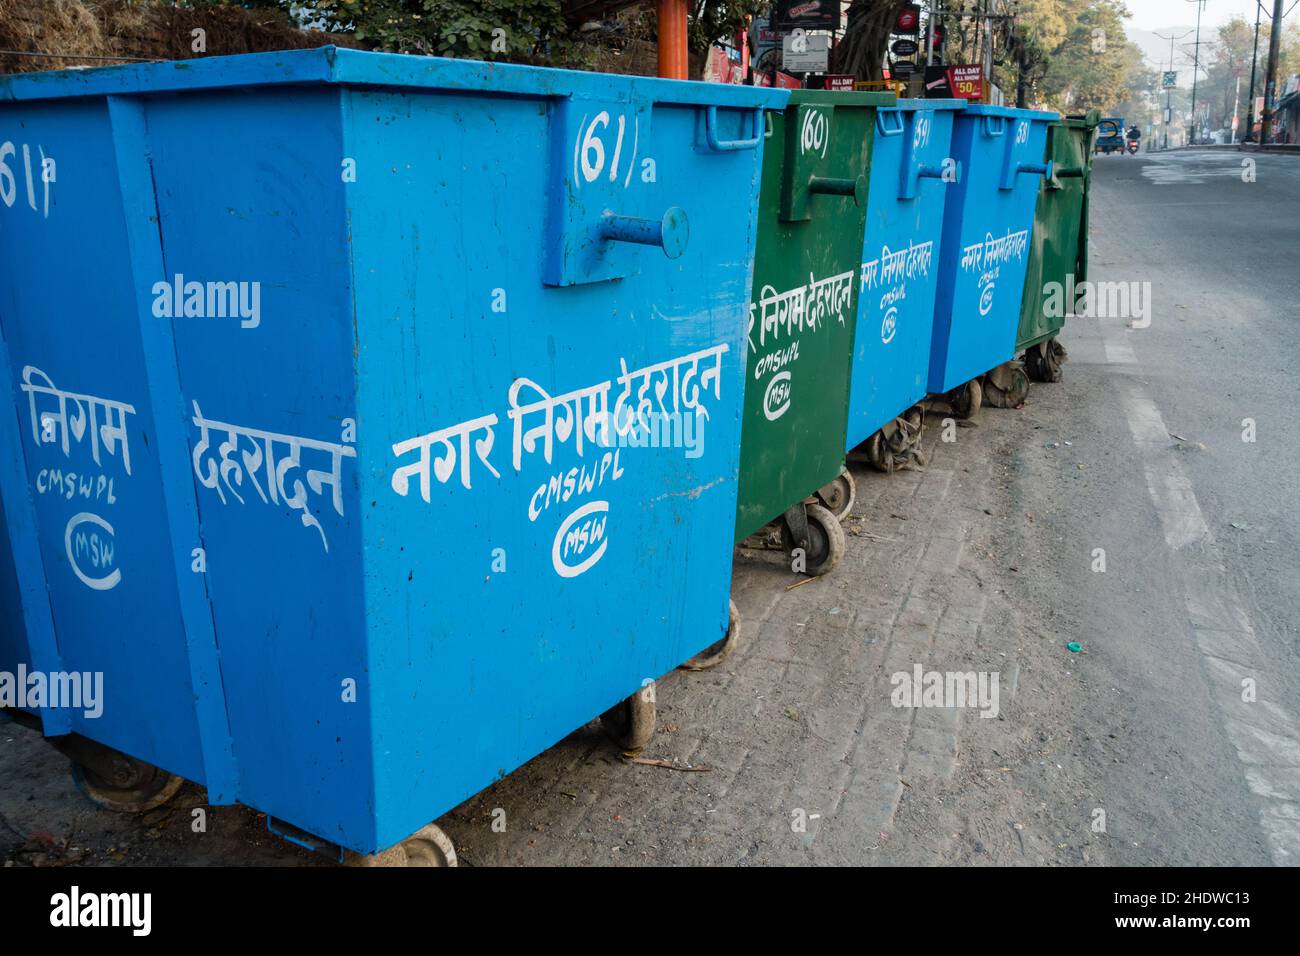 Dumpster meaning in hindi